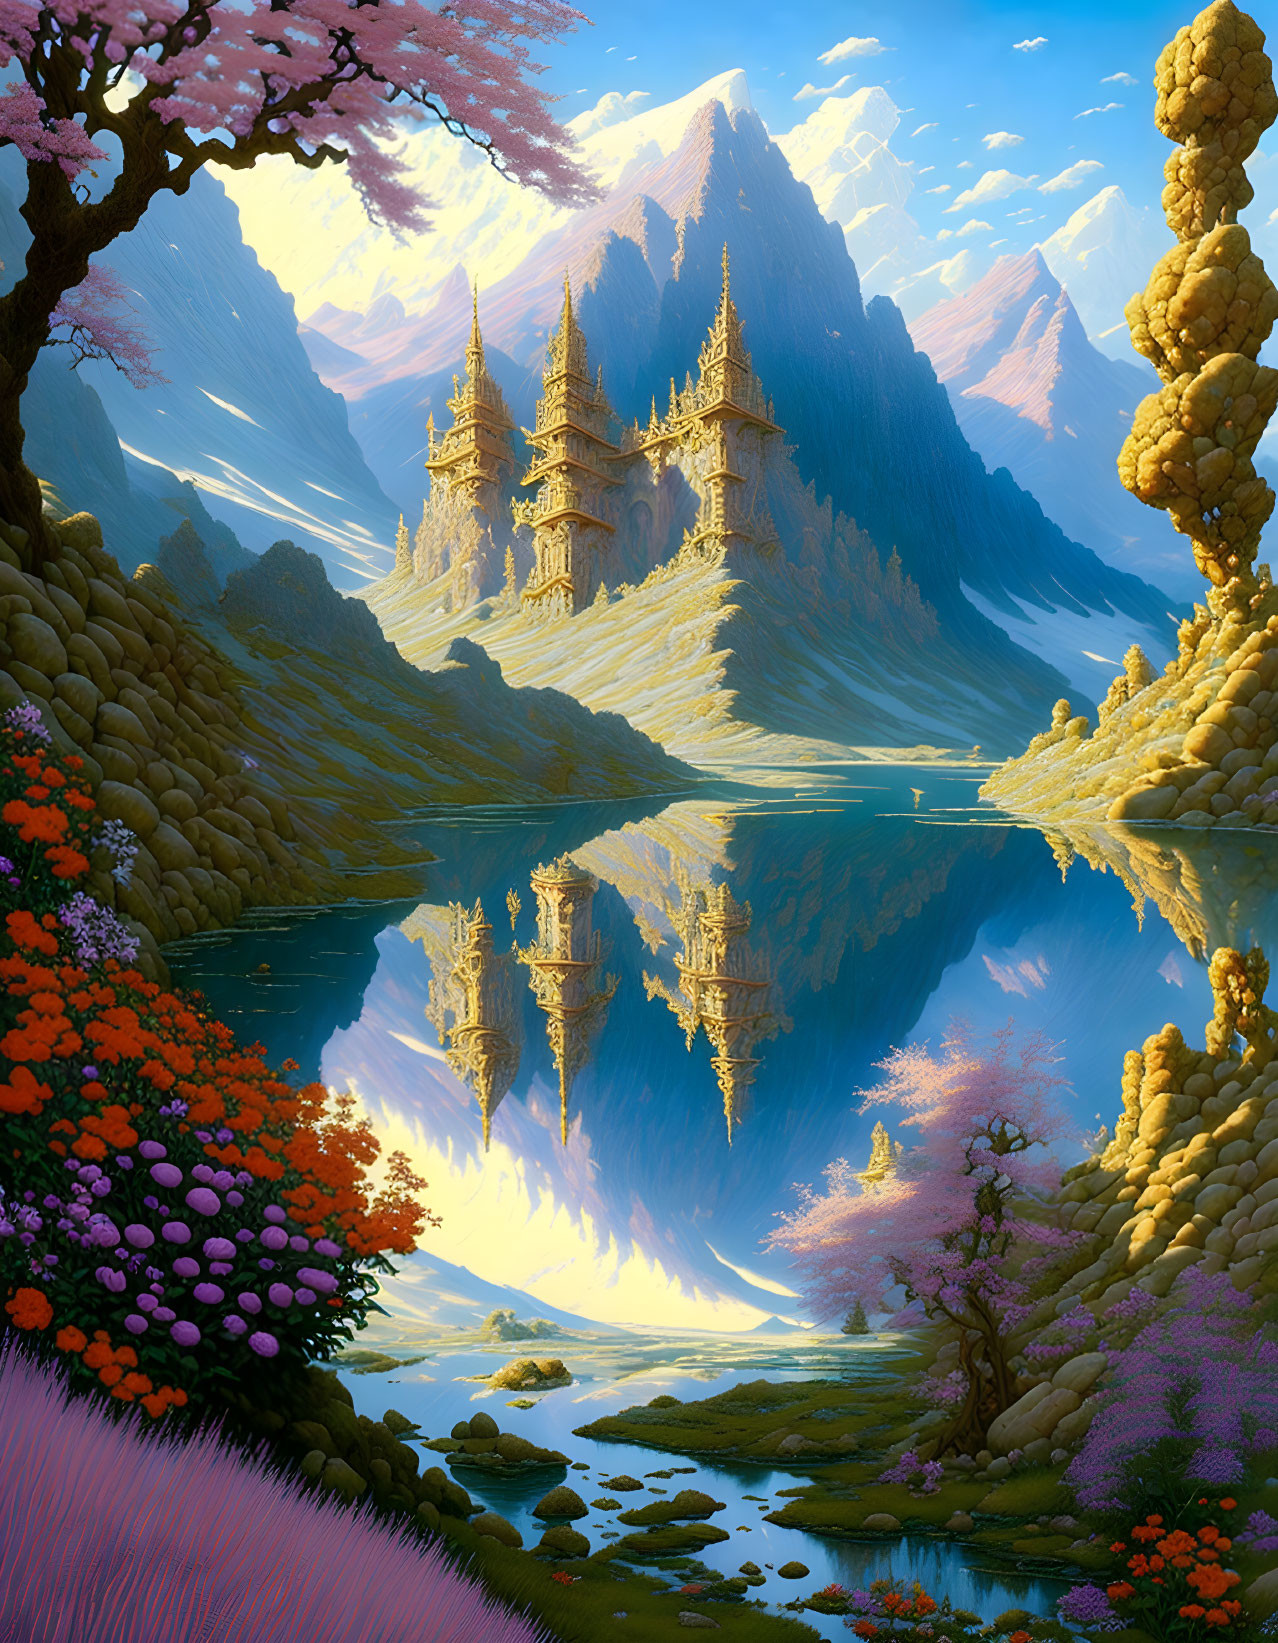 Fantasy landscape with castle, lake, flora, mountains, and clear sky